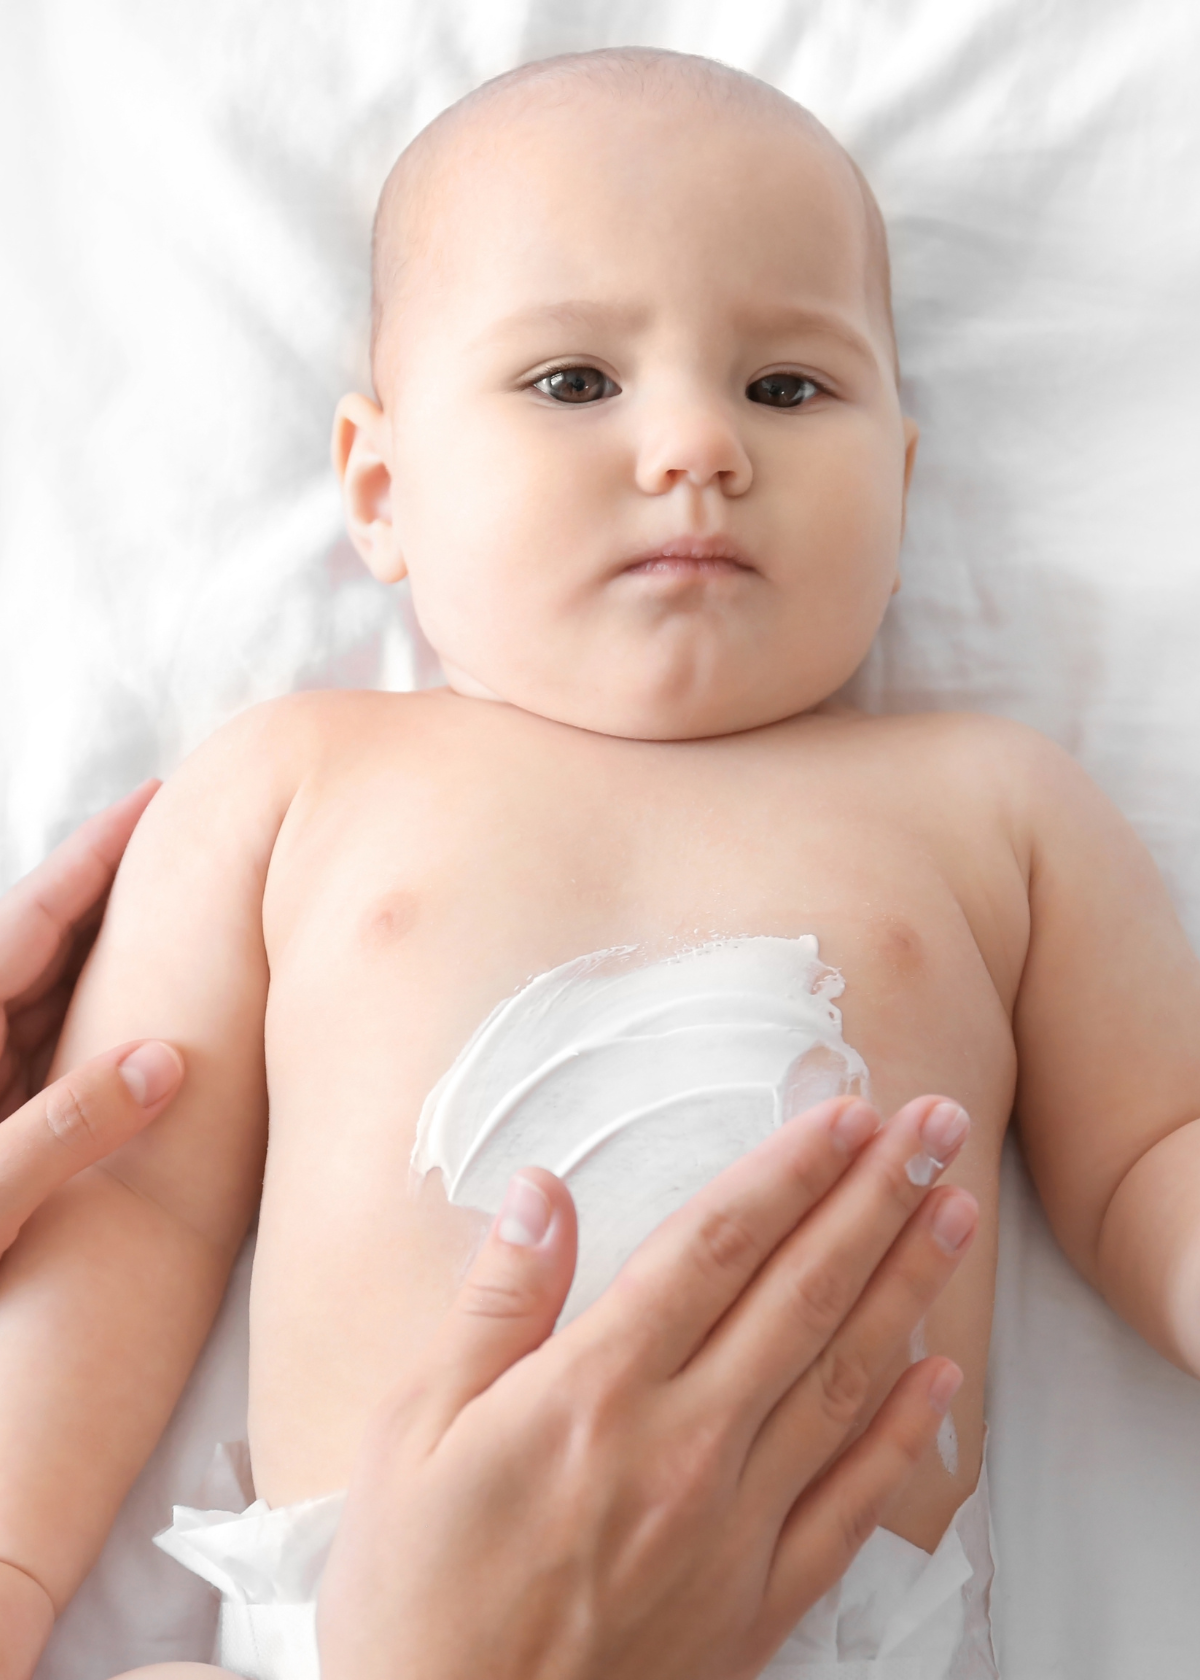 Is Calamine Lotion For Baby Safe? Find out here!